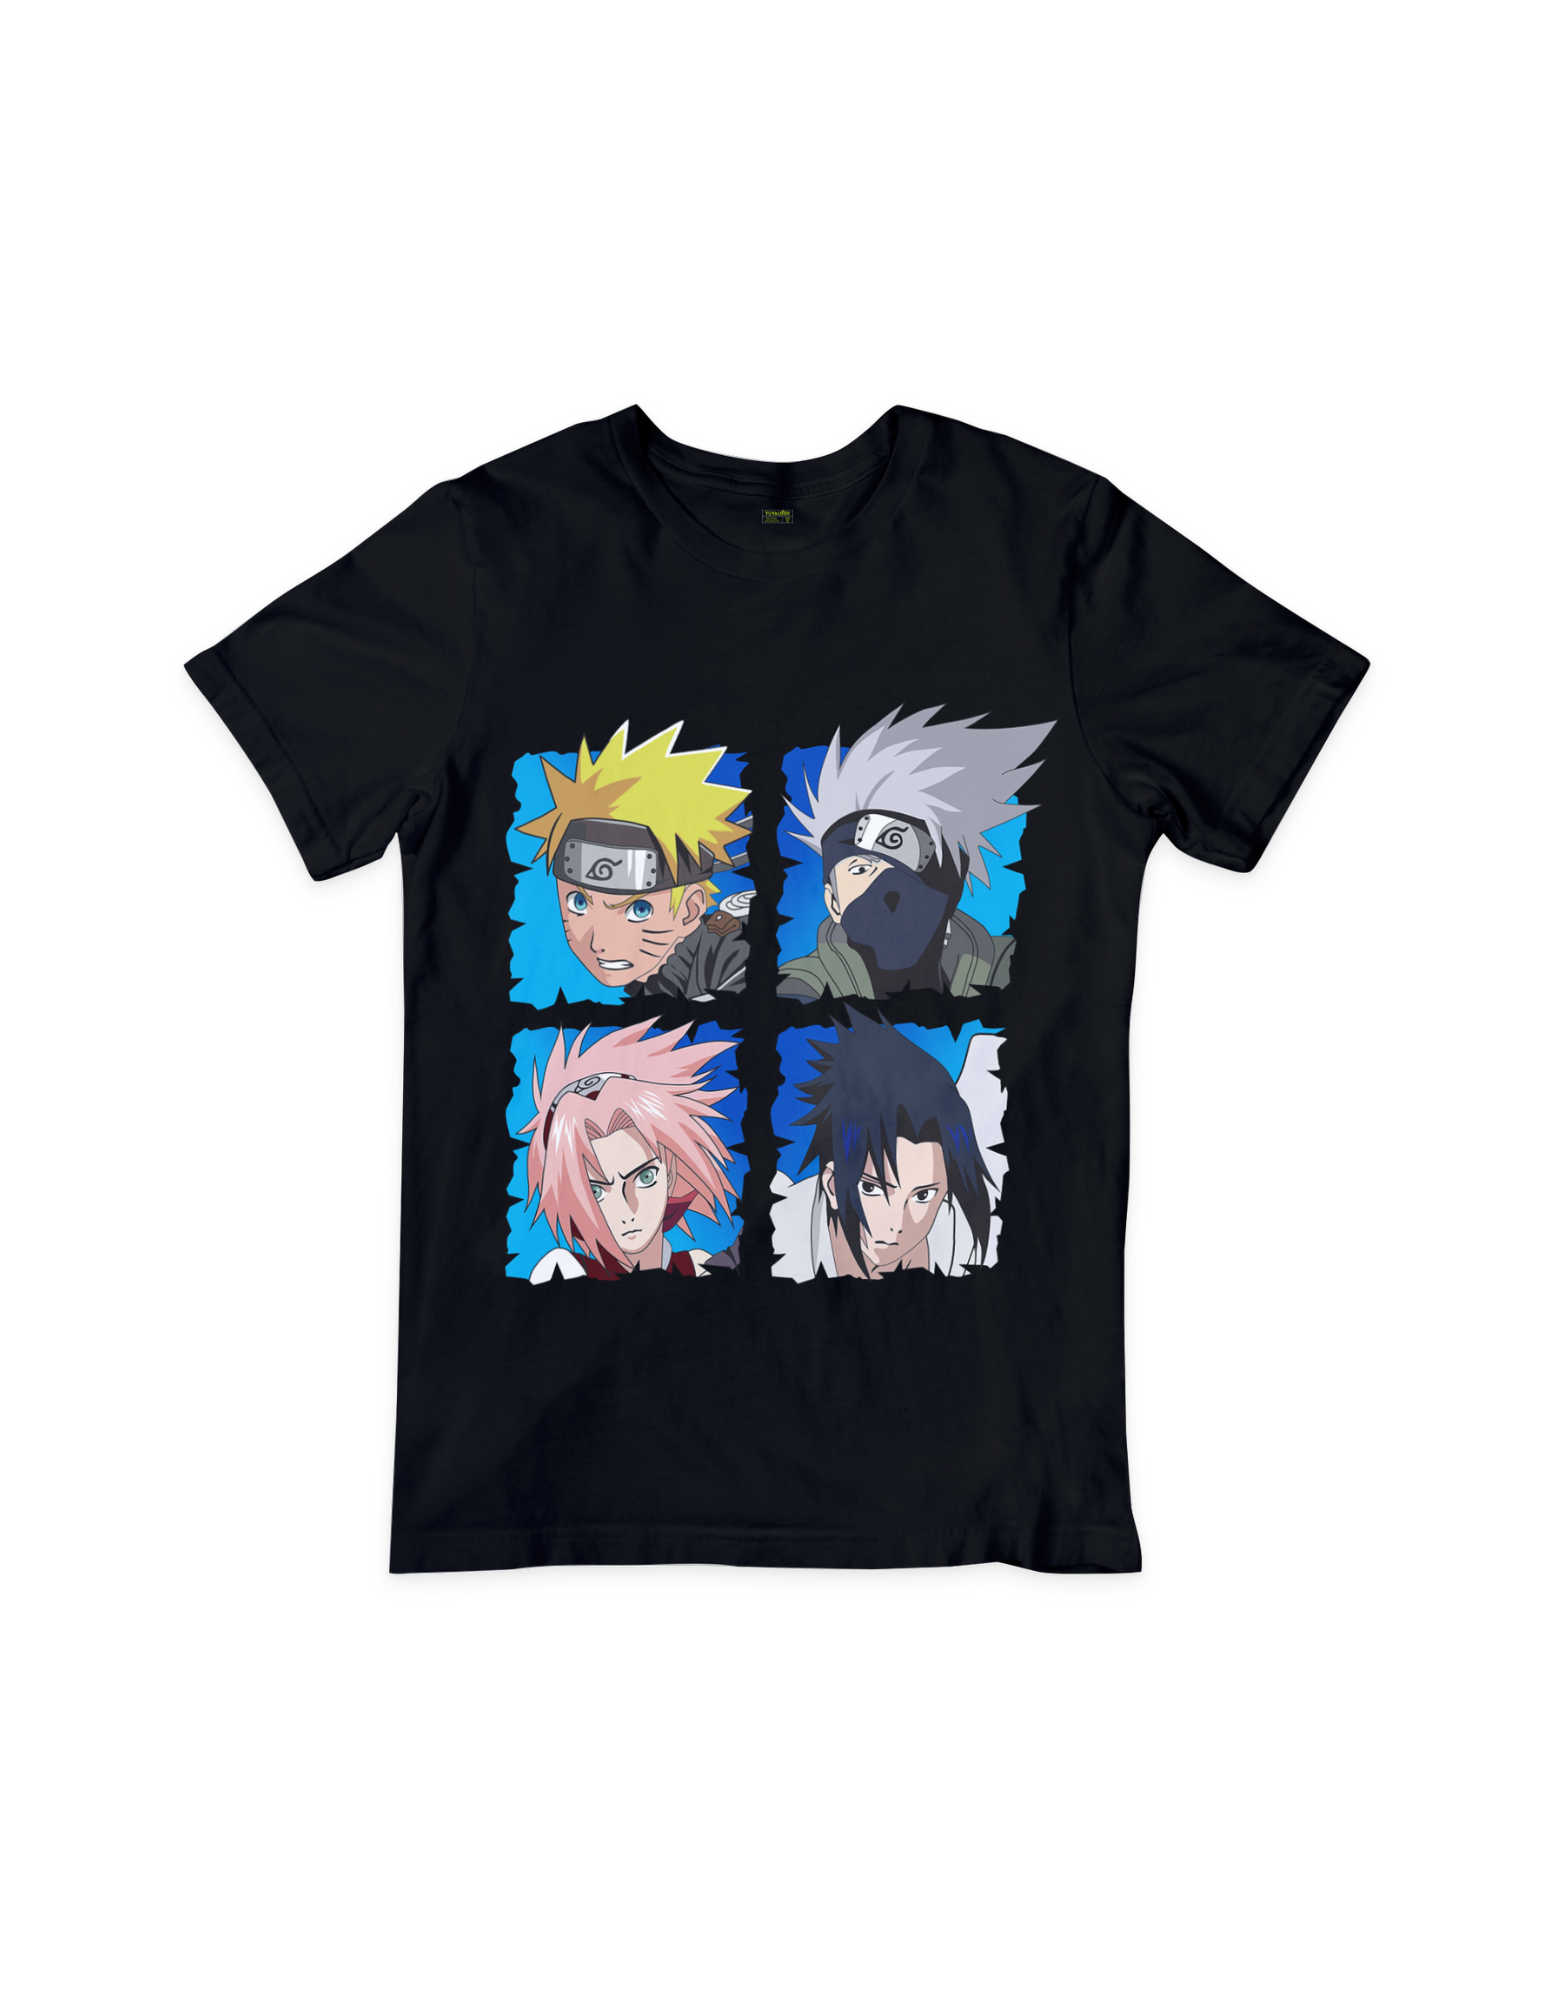 Naruto t-shirt - vibrant design featuring Naruto Uzumaki and iconic characters from the anime series